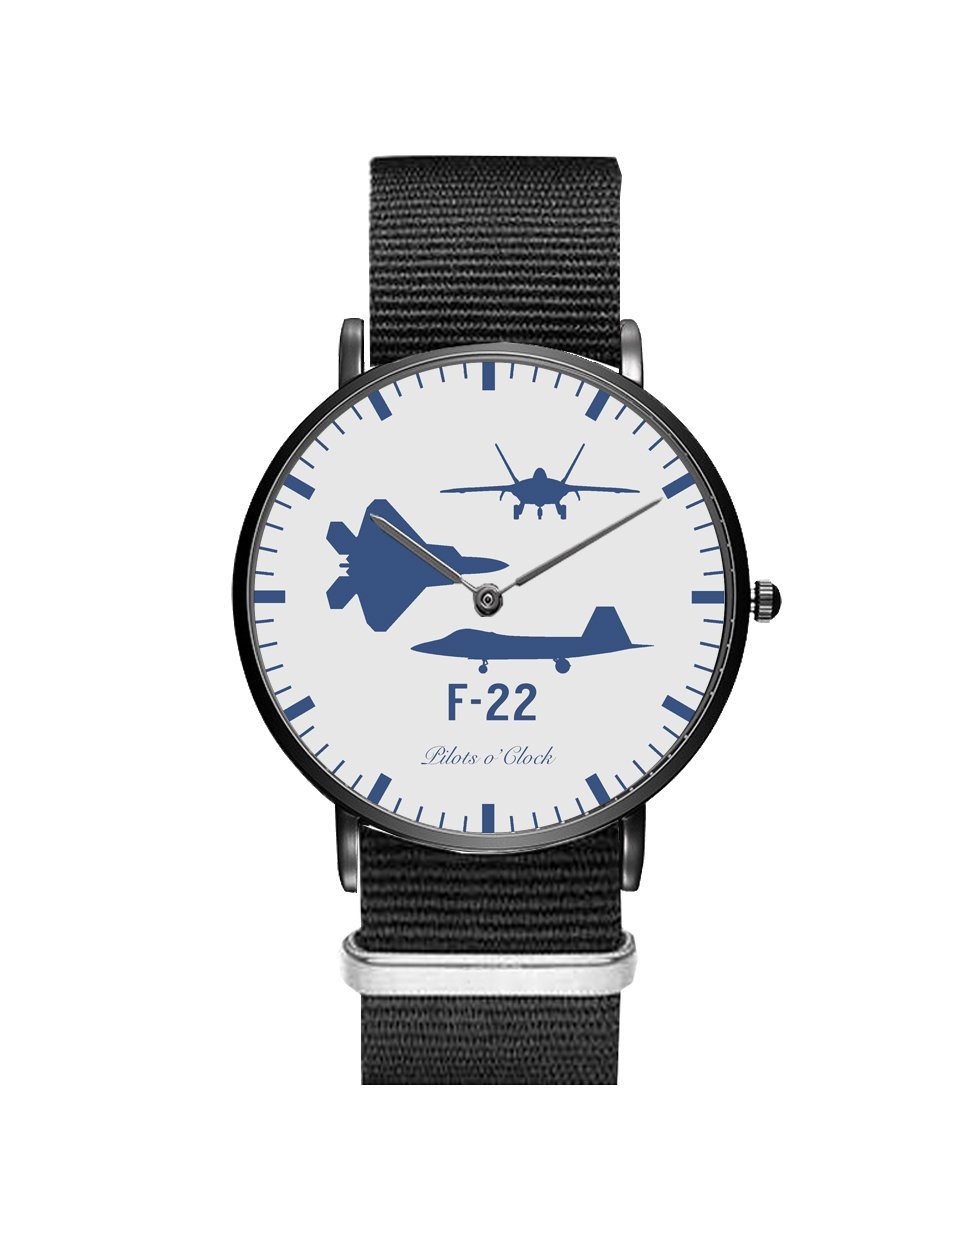 F22 Raptor (Special) Leather Strap Watches Pilot Eyes Store Black & Black Nylon Strap 